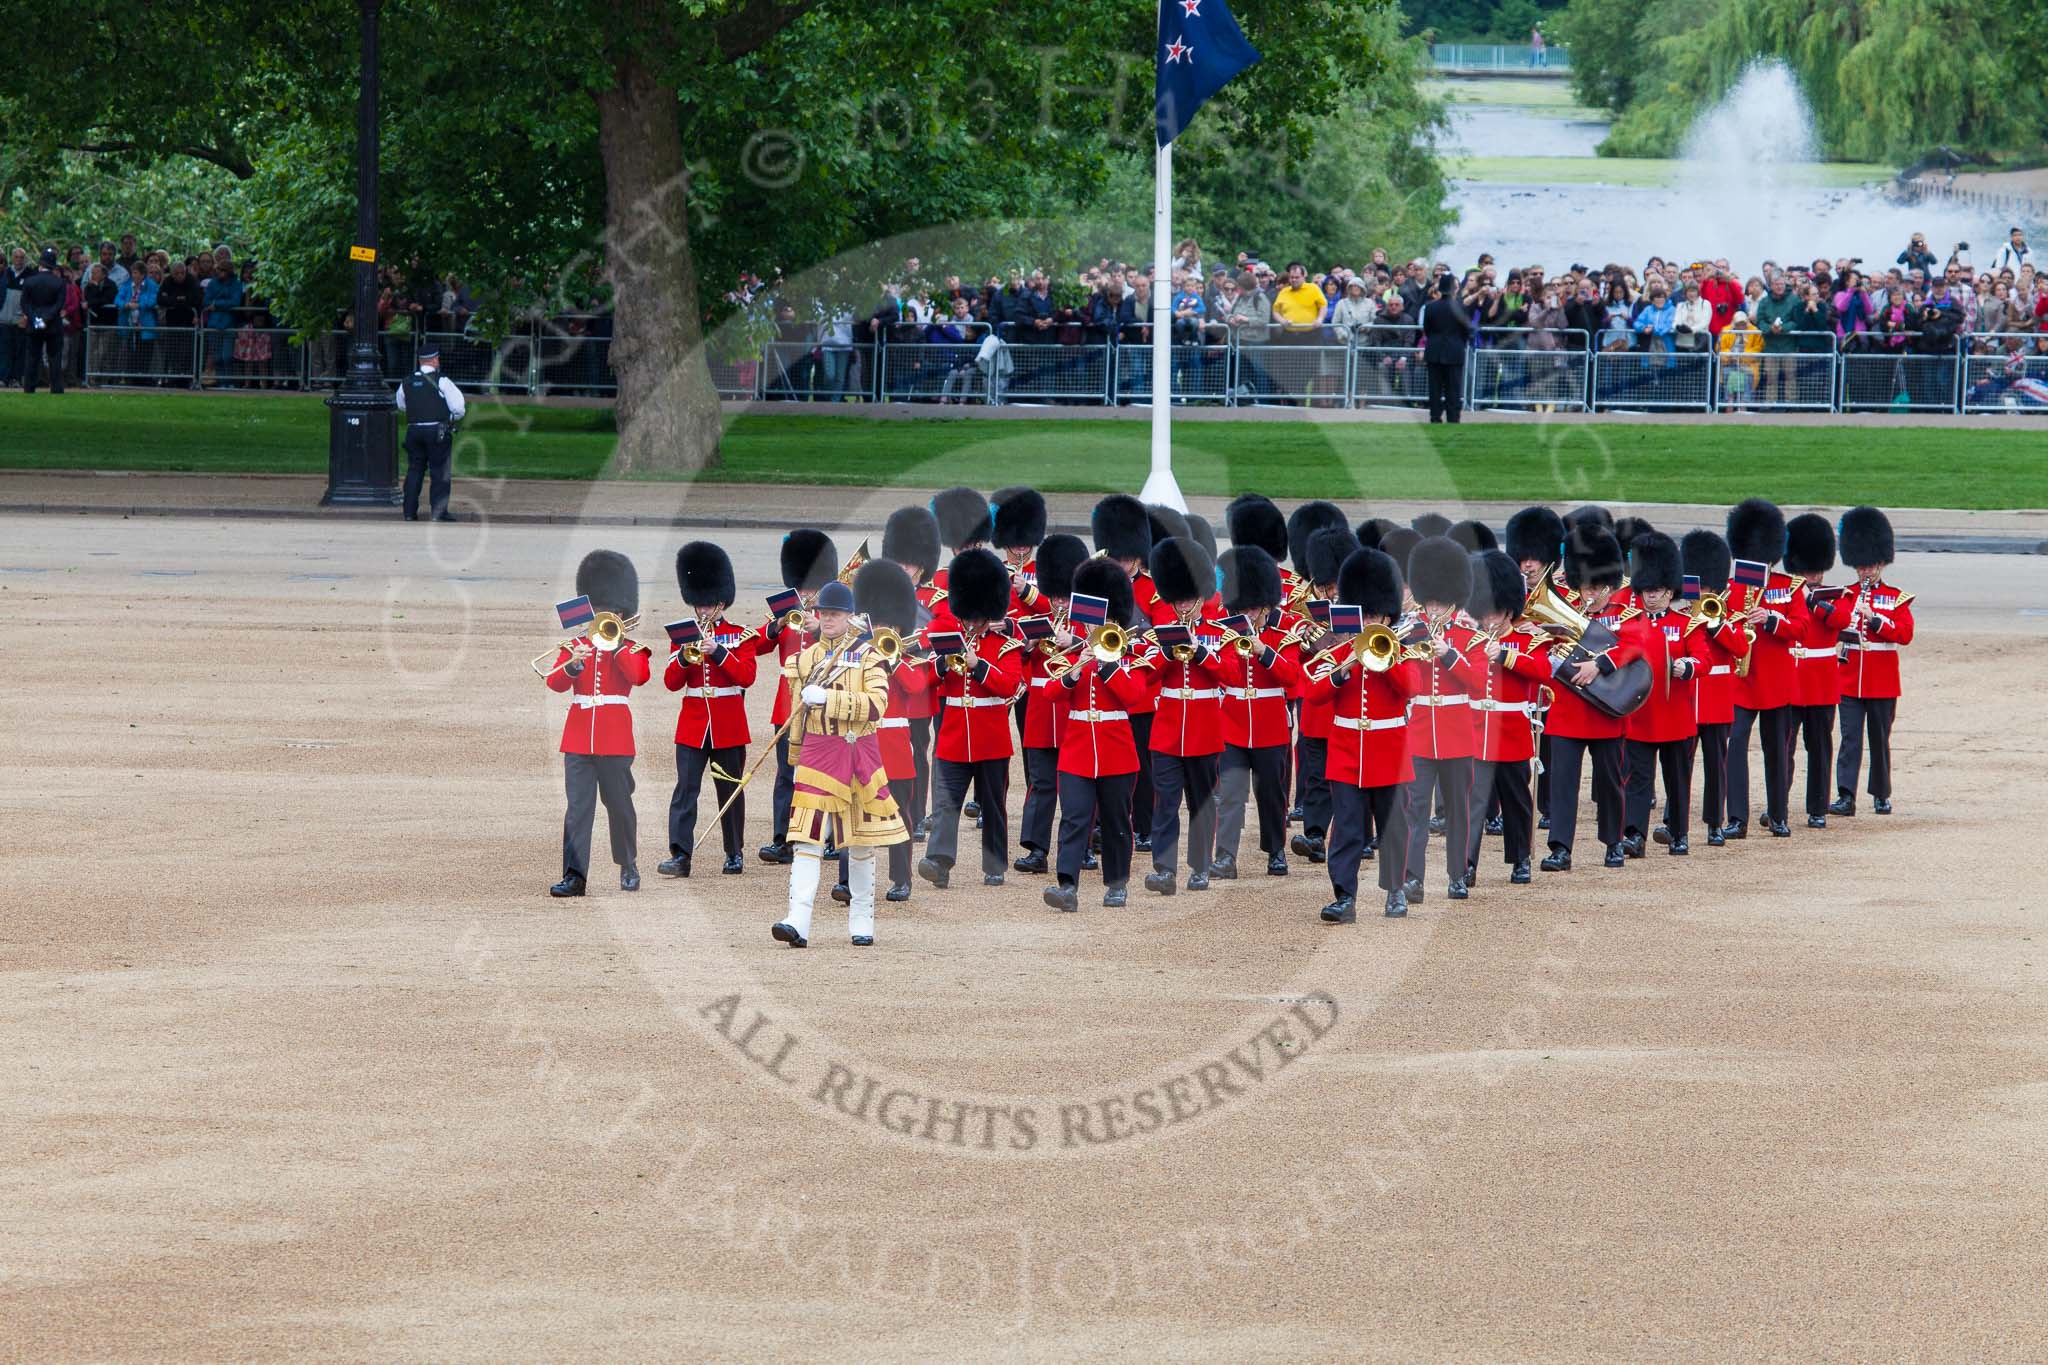 Trooping the Colour 2013: Drum Major Tony Taylor, Coldstream Guards, leading the second band to arrive at Horse Guards Parade, the Band of the Irish Guards. Image #57, 15 June 2013 10:16 Horse Guards Parade, London, UK